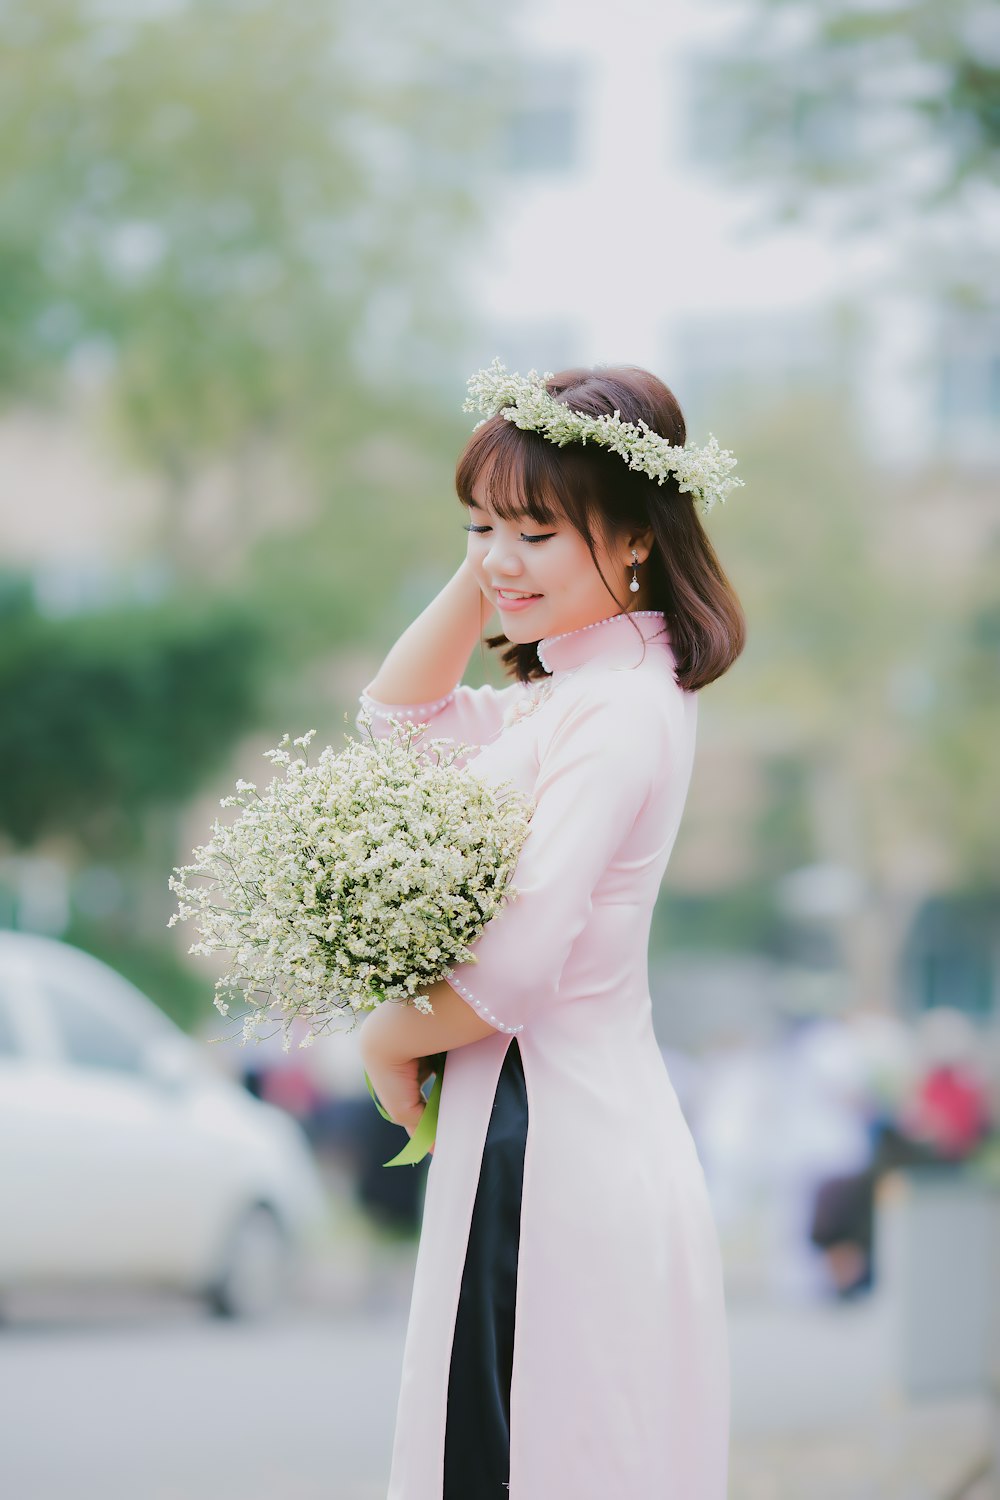 woman holding her hair while carrying white petaled flower bouquet in focus photography